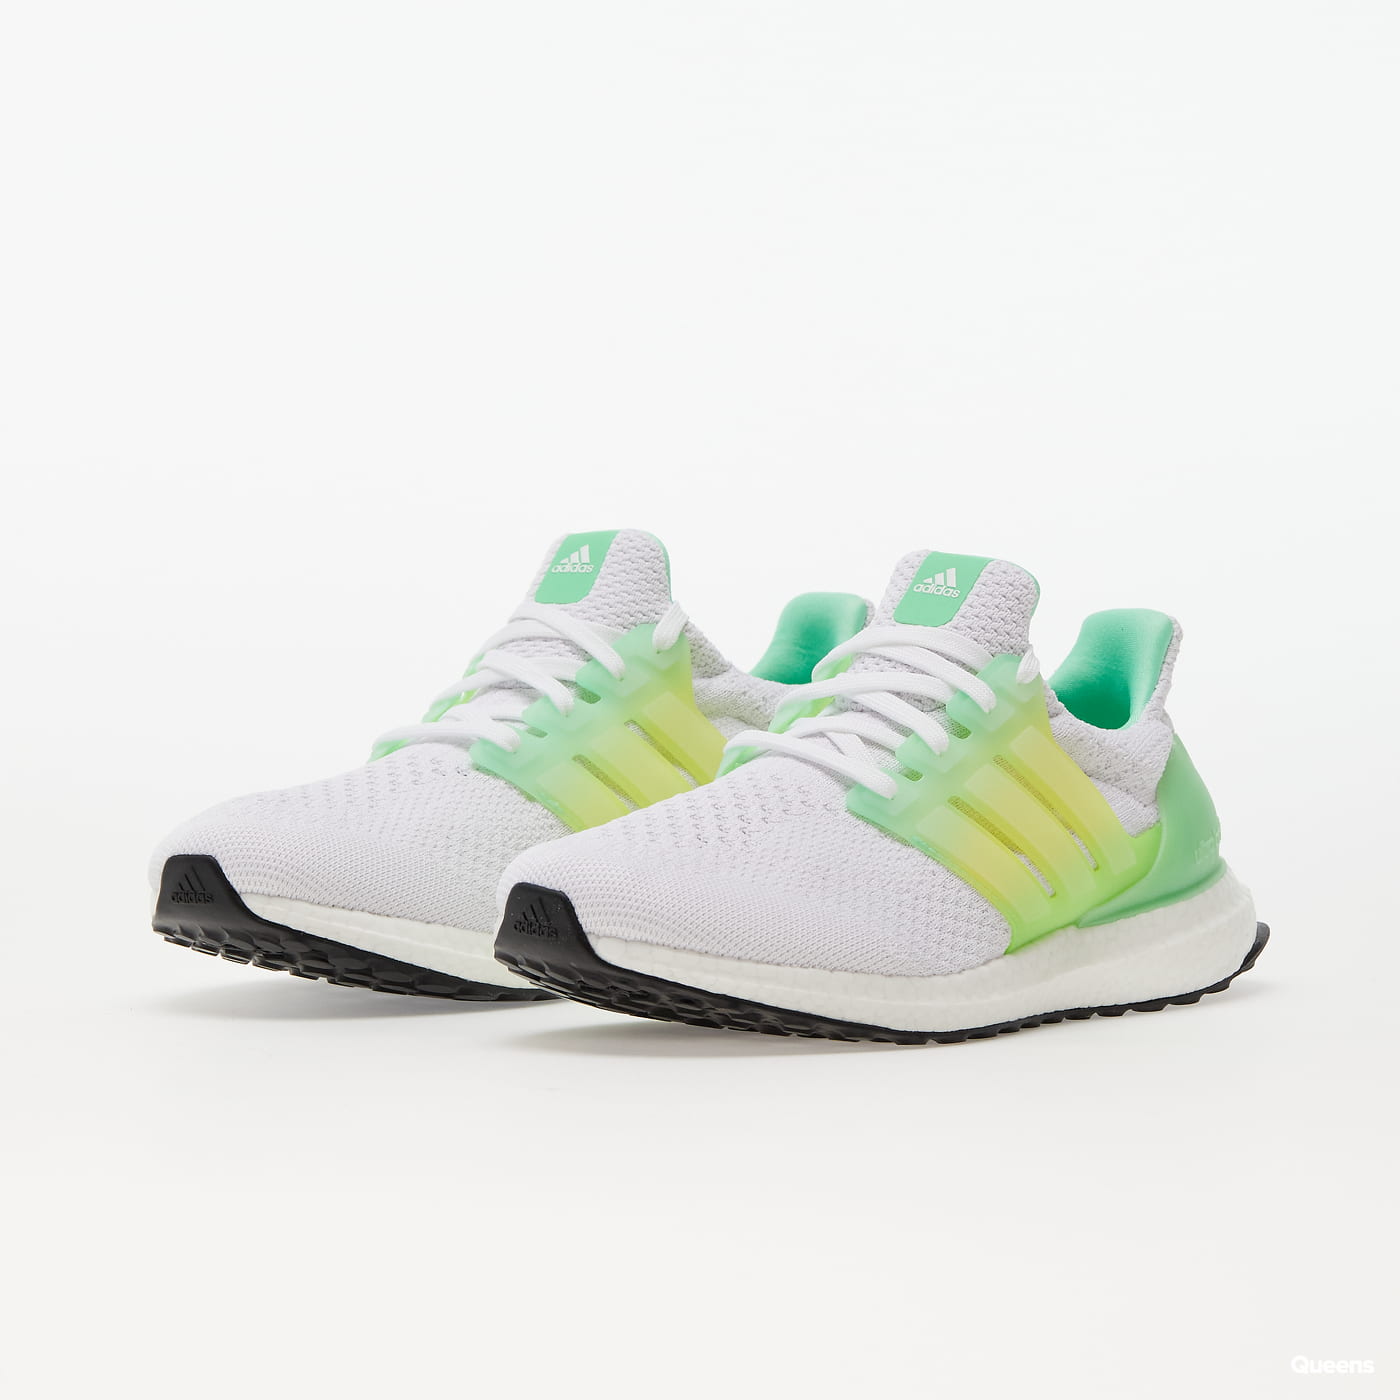 adidas Performance Ultraboost 5.0 DNA cloud white / cloud white / beam green adidas Performance